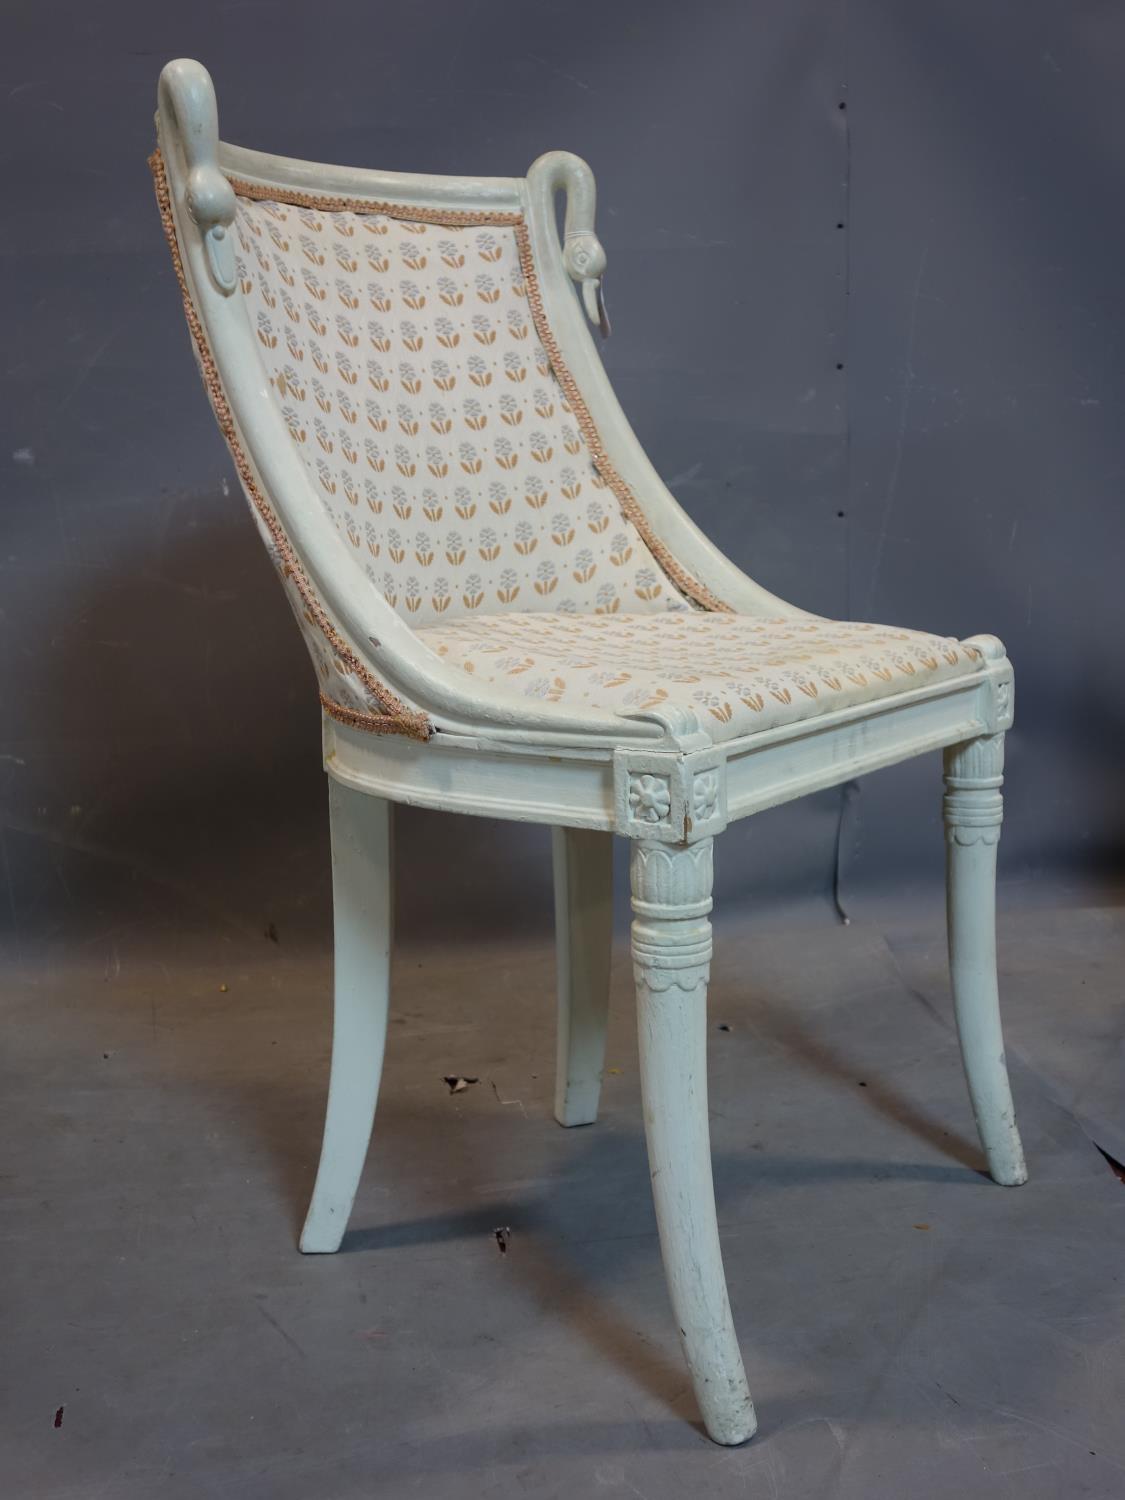 A Regency style white painted chair, with swan head finials - Image 2 of 4